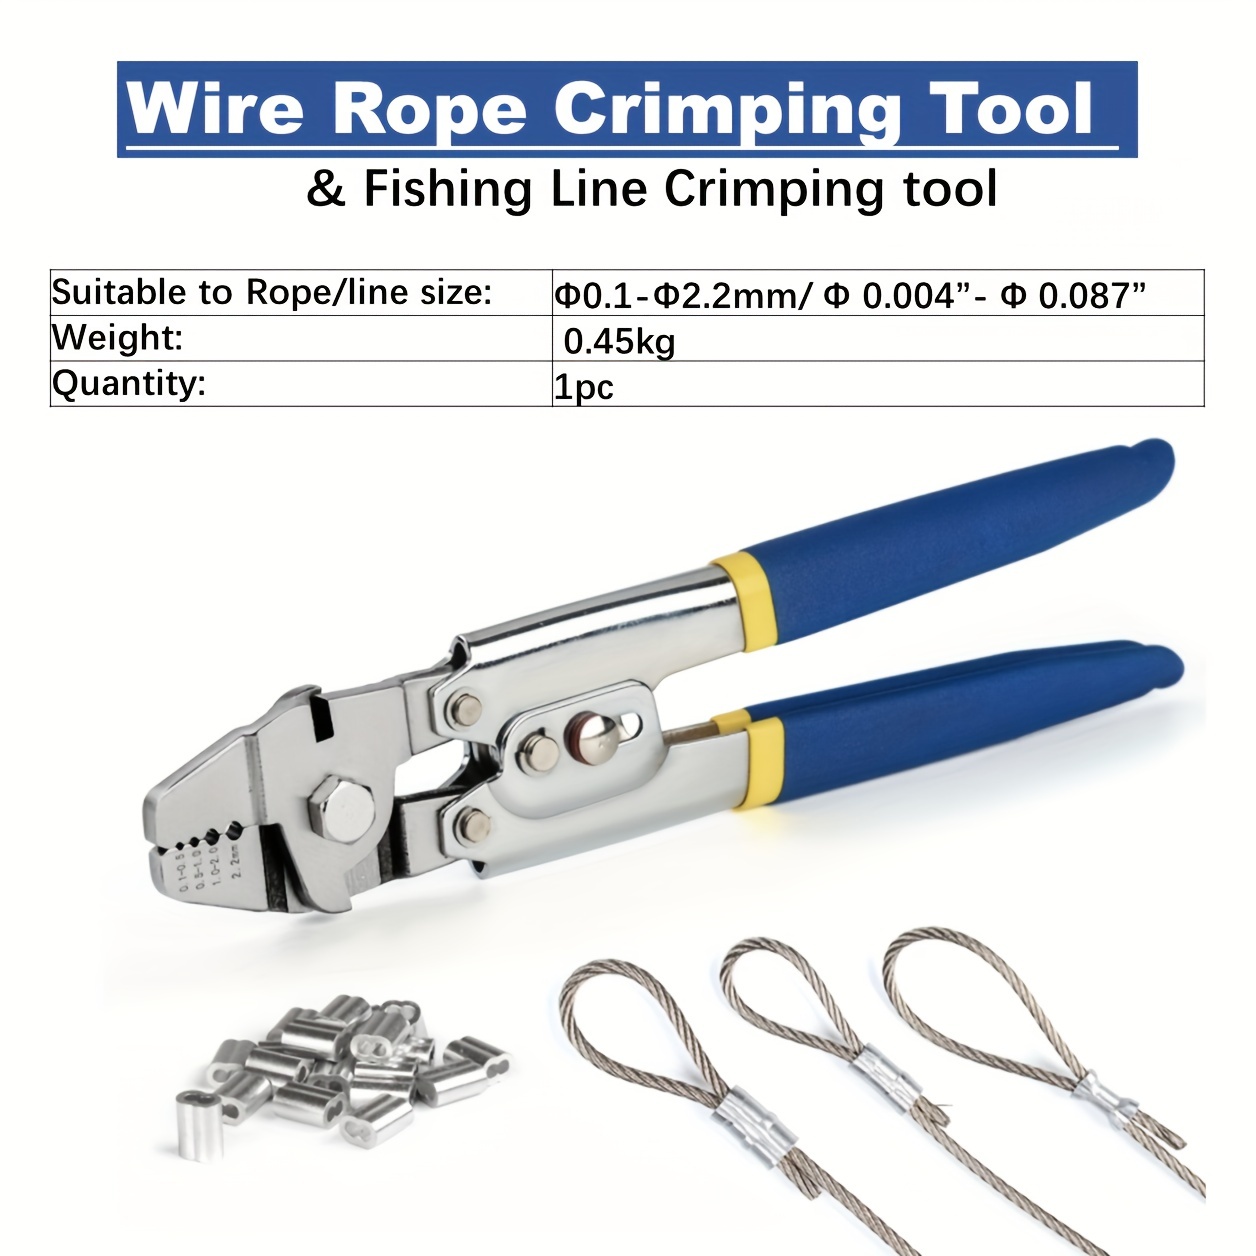 Wire Rope Crimping Tool Kit With Sleeves Up To 2.2mm Length